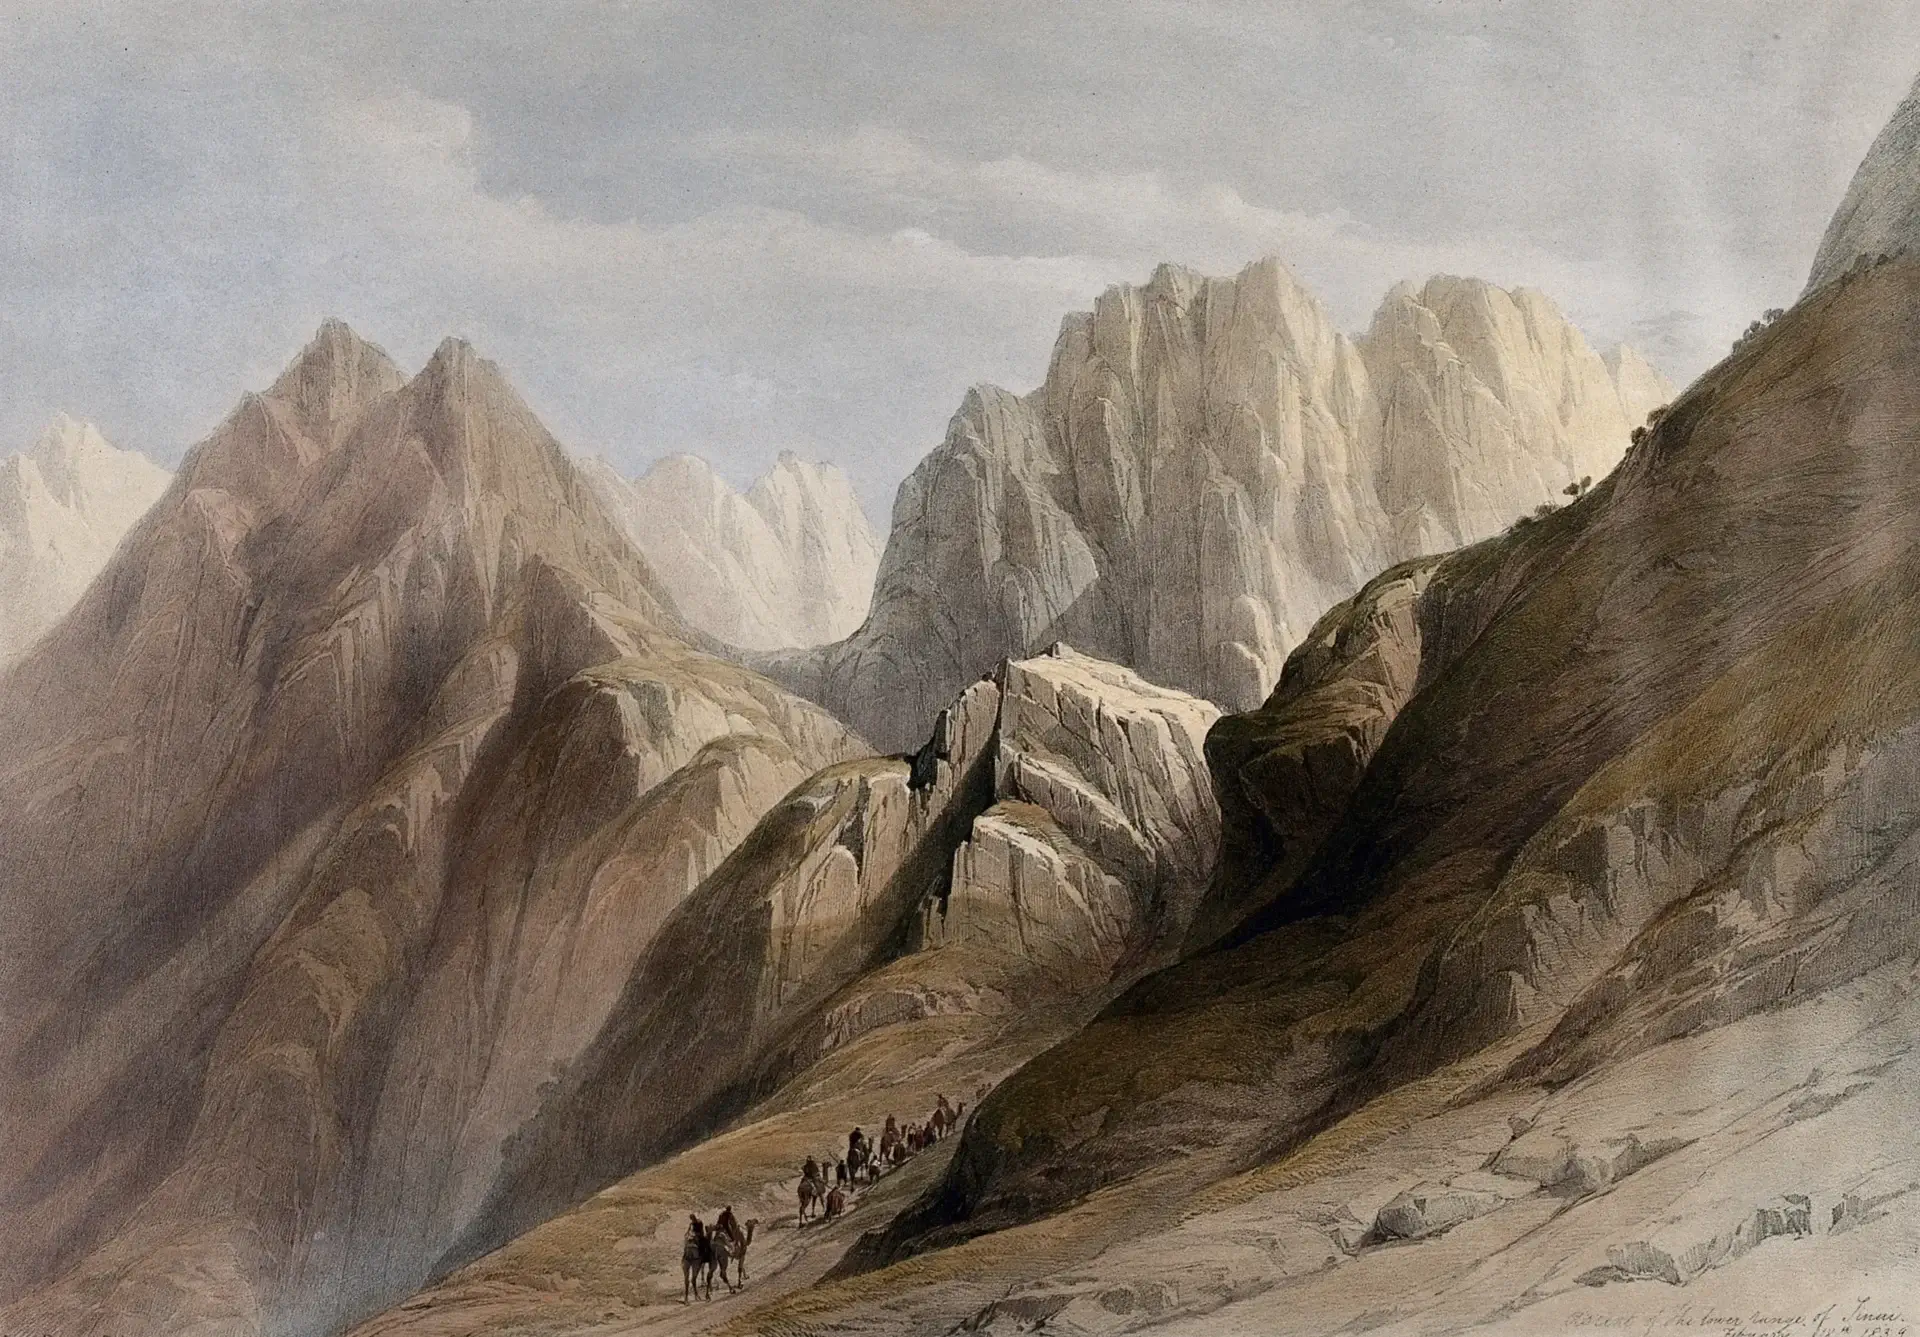 A painting of mountains with people on horseback.